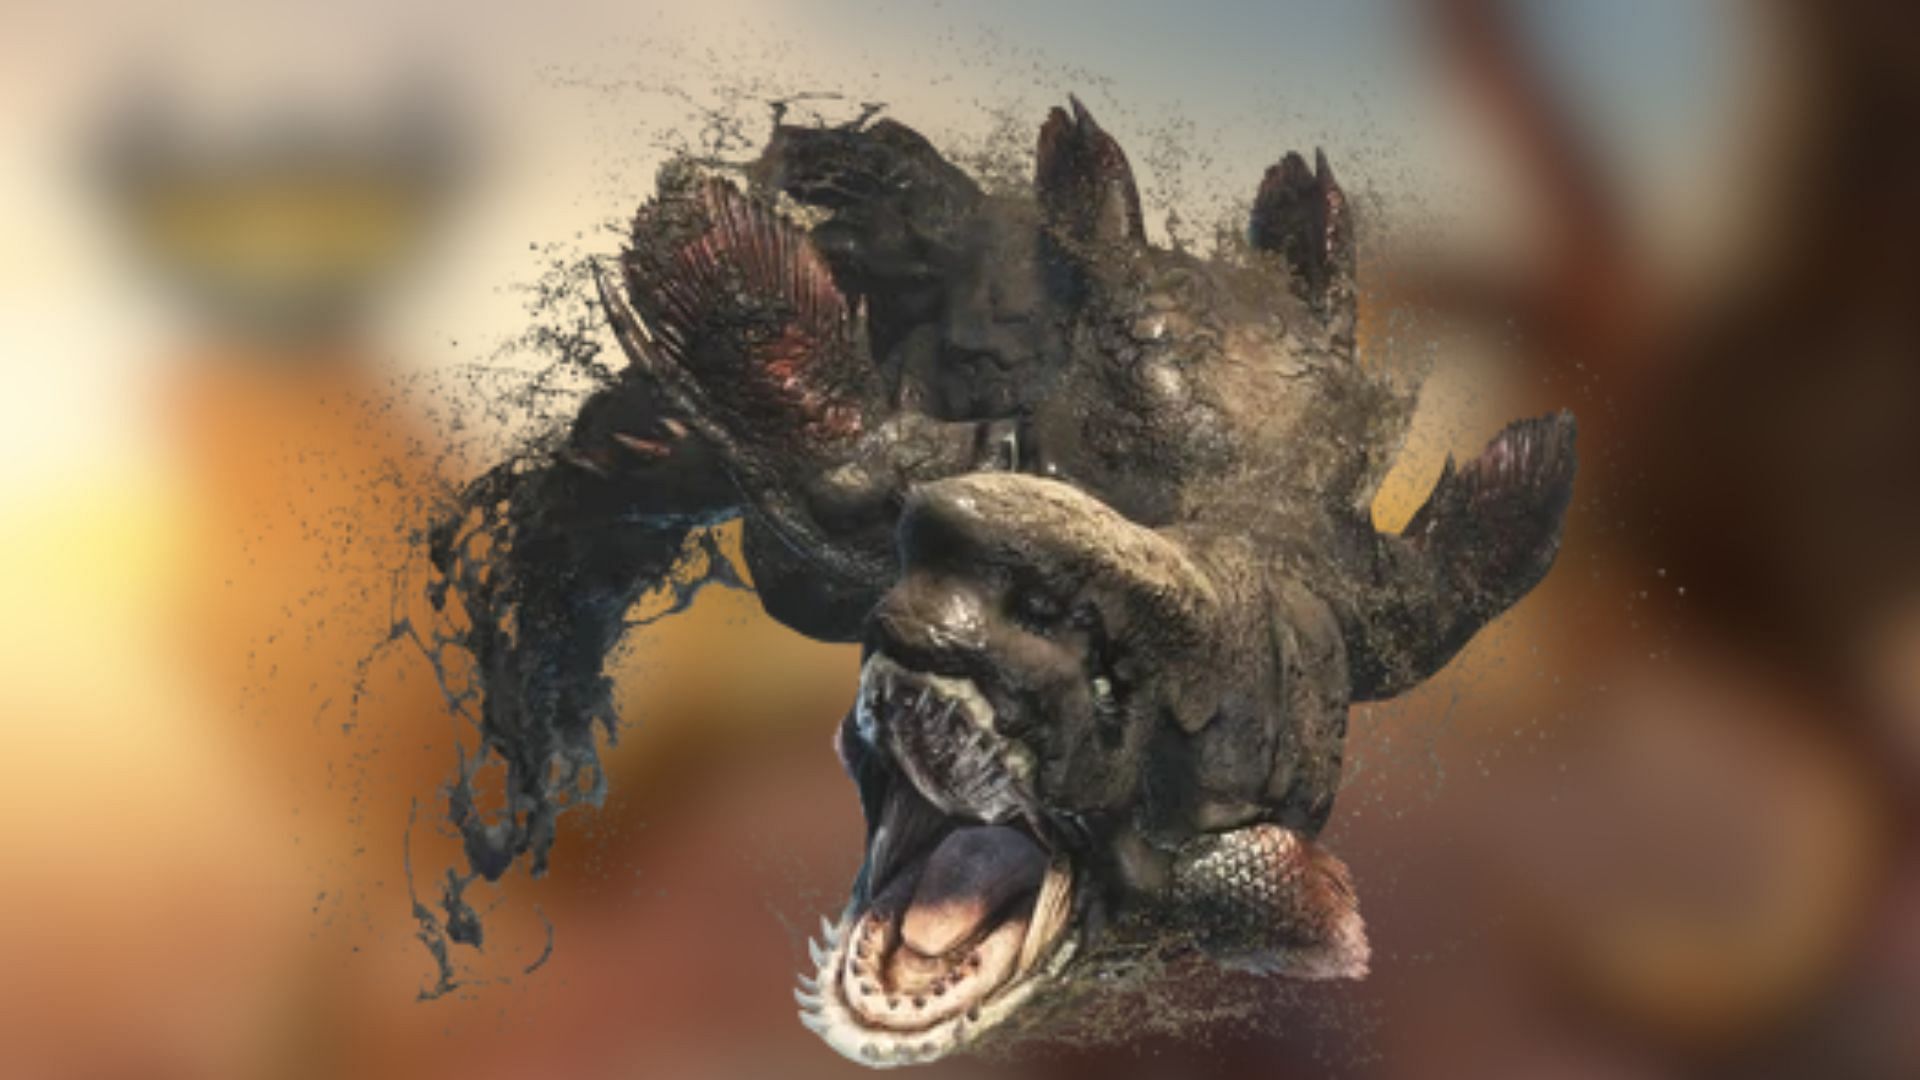 Monster Hunter Now: All monsters and their details